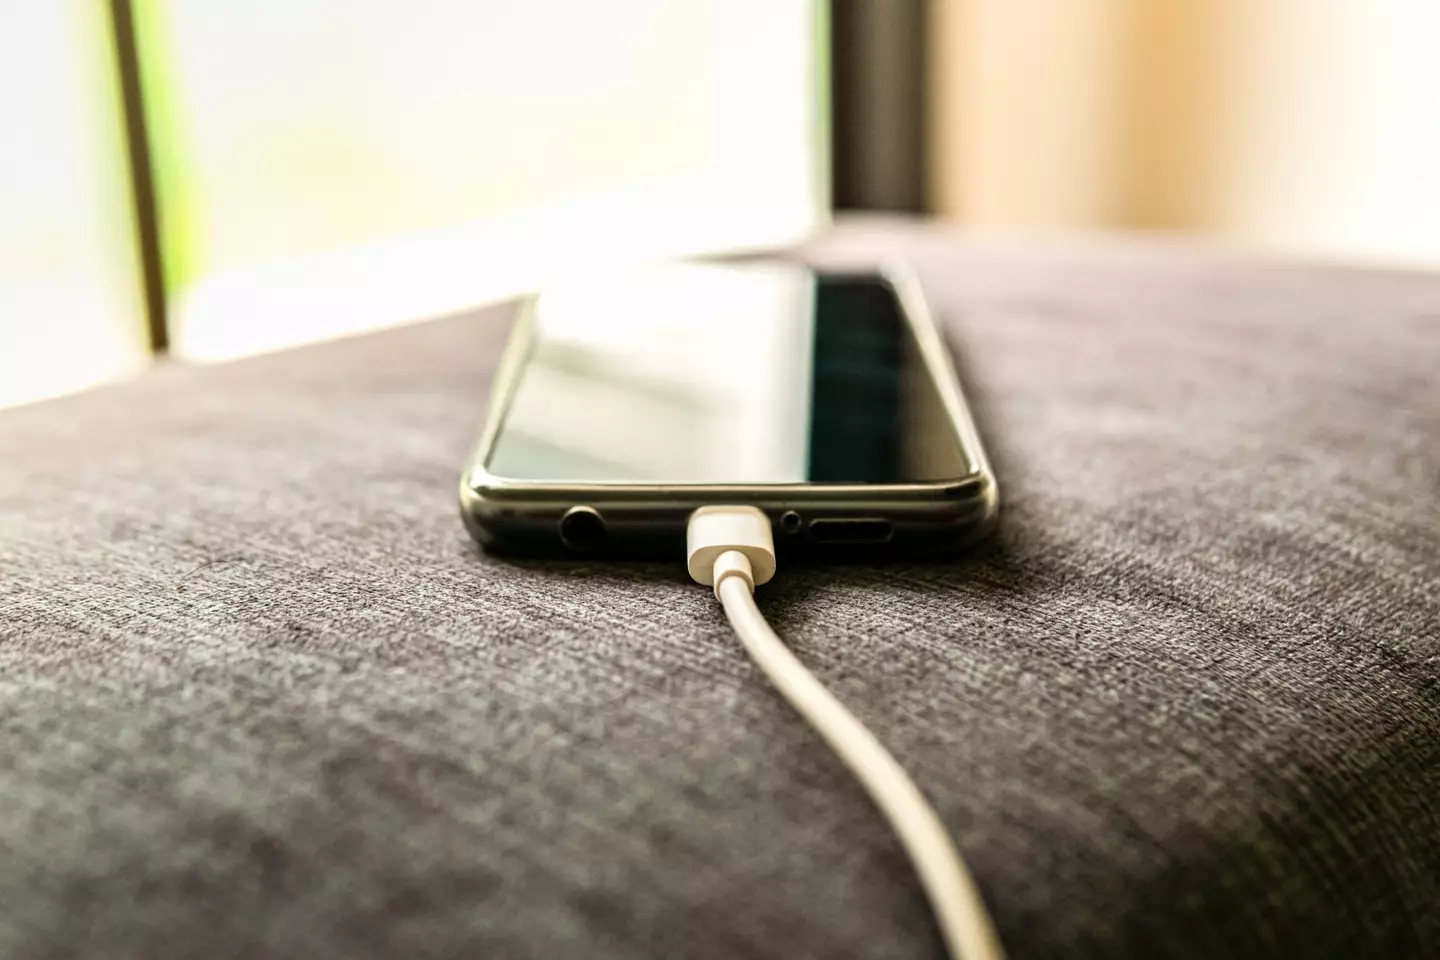 A lot of us are probably guilty of letting our phone charge overnight.